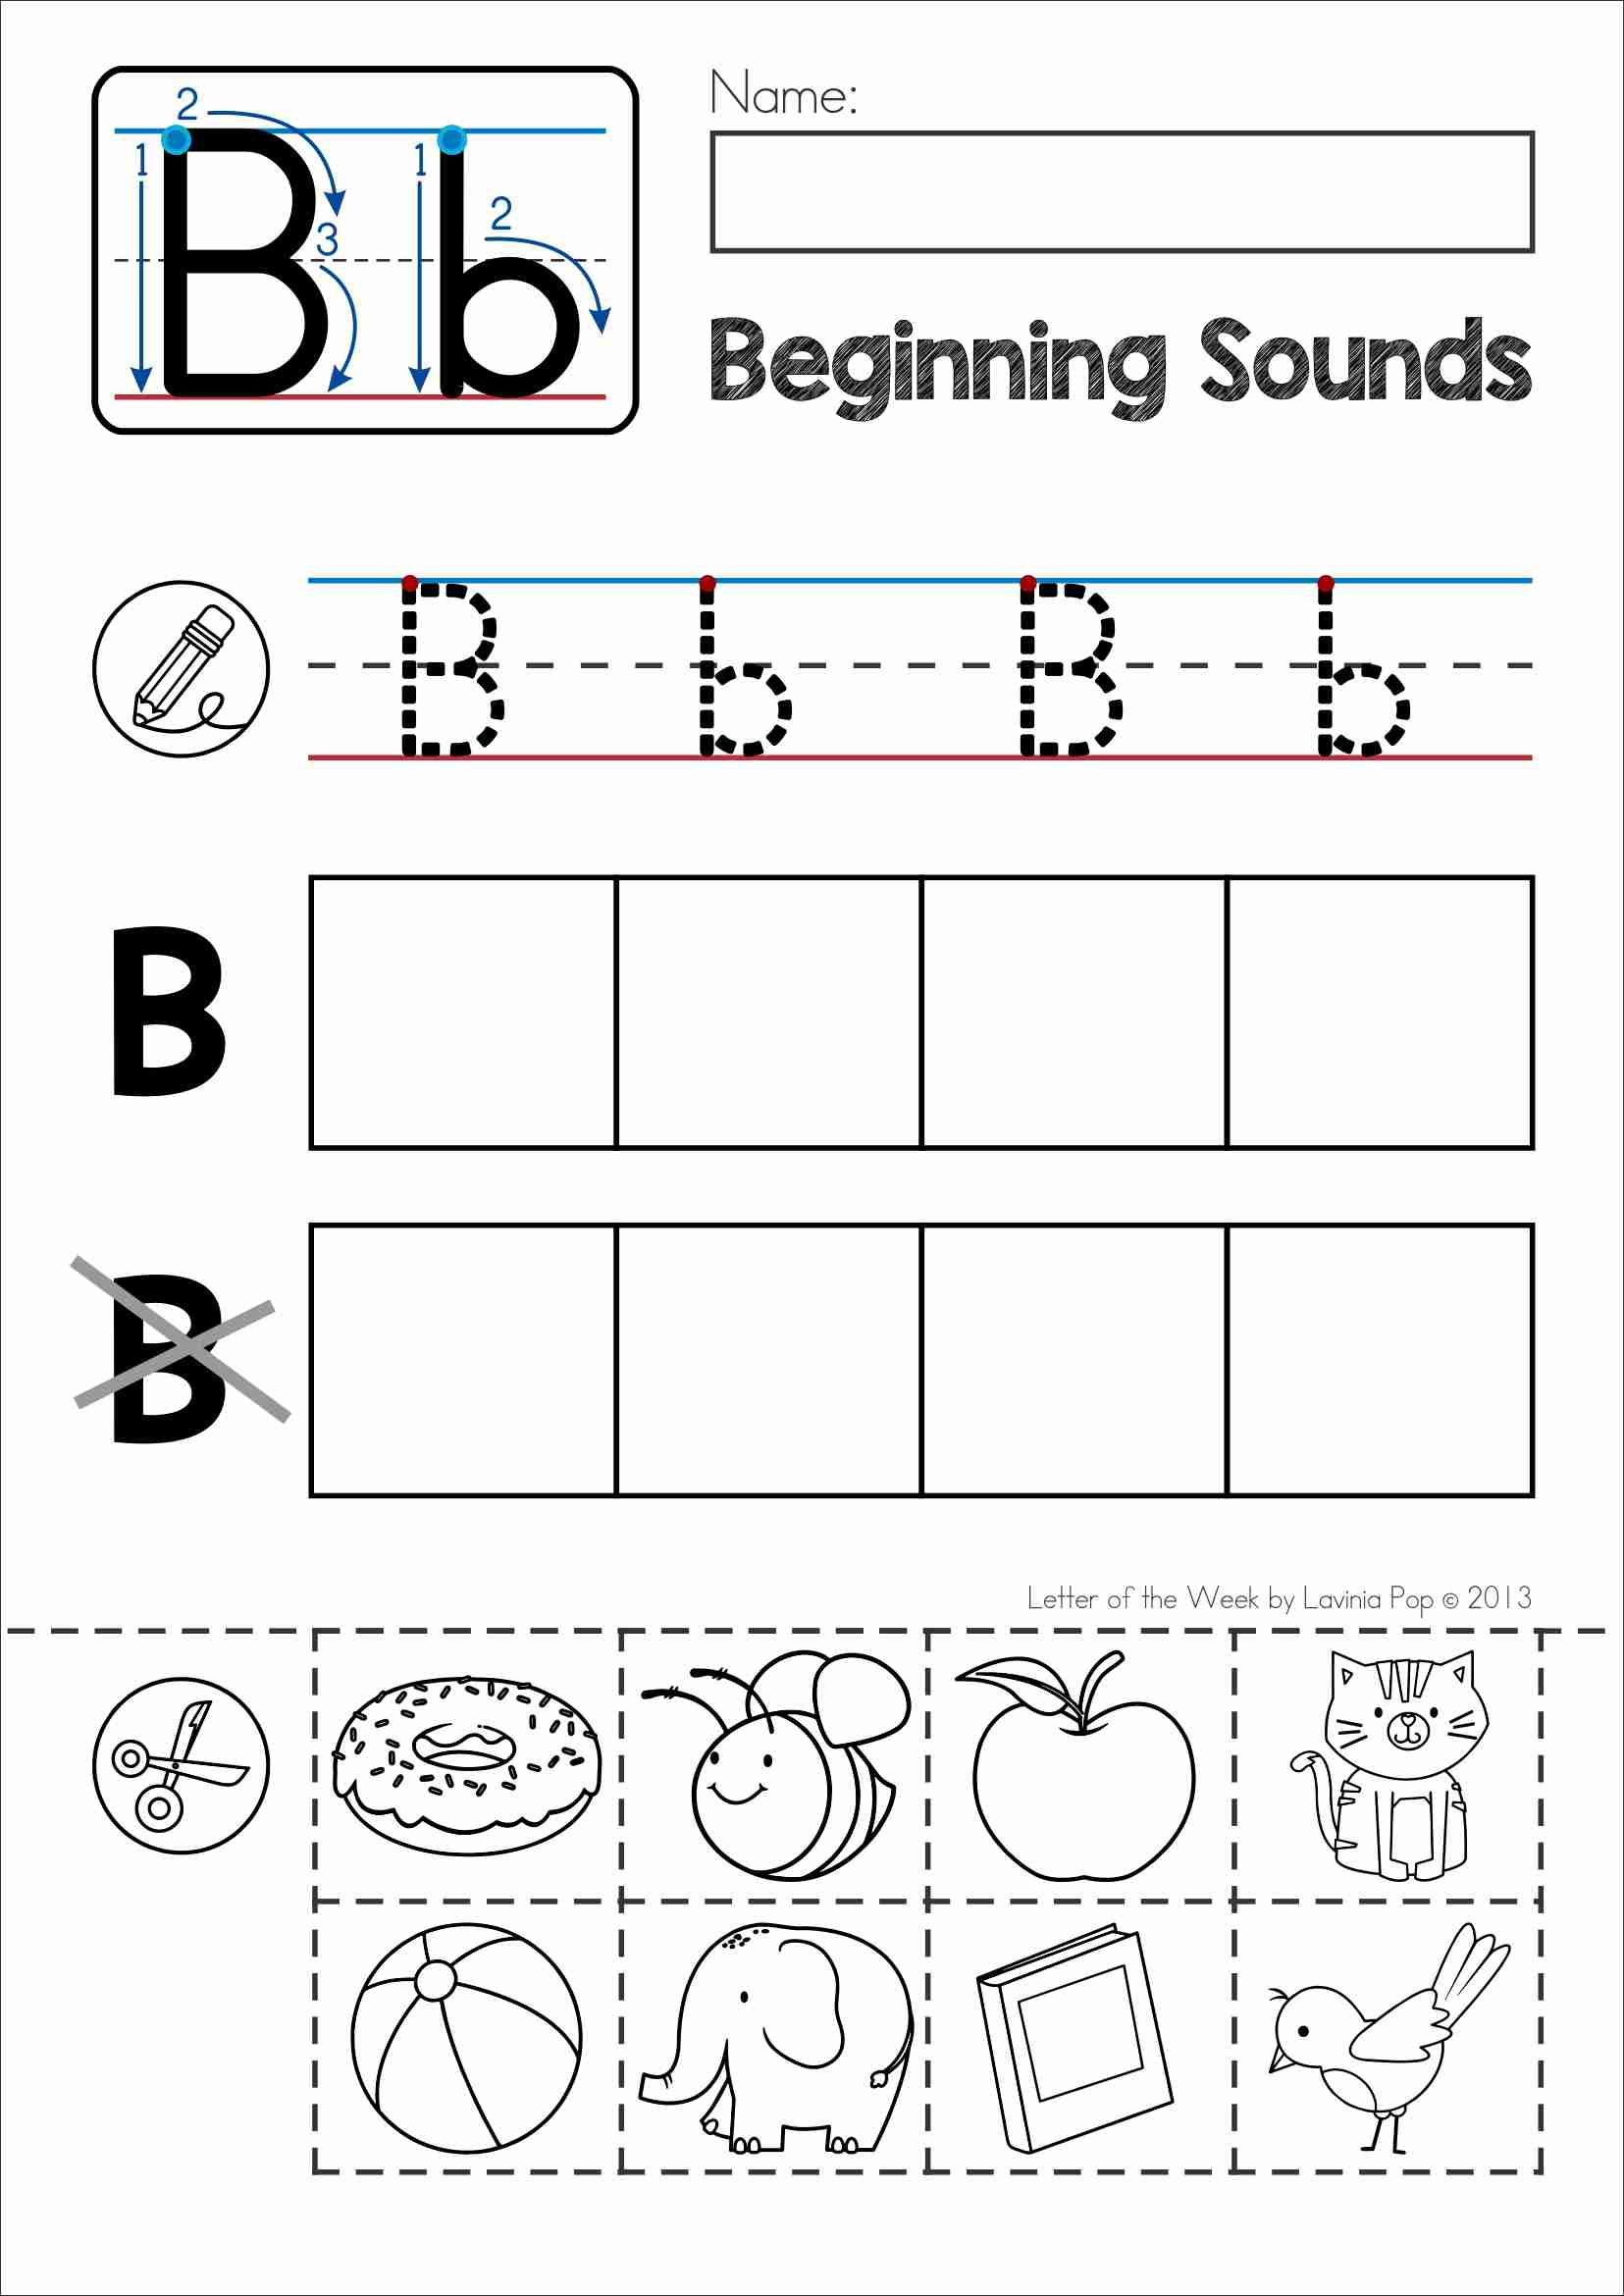 18 Letter B Worksheets For Practicing KittyBabyLove